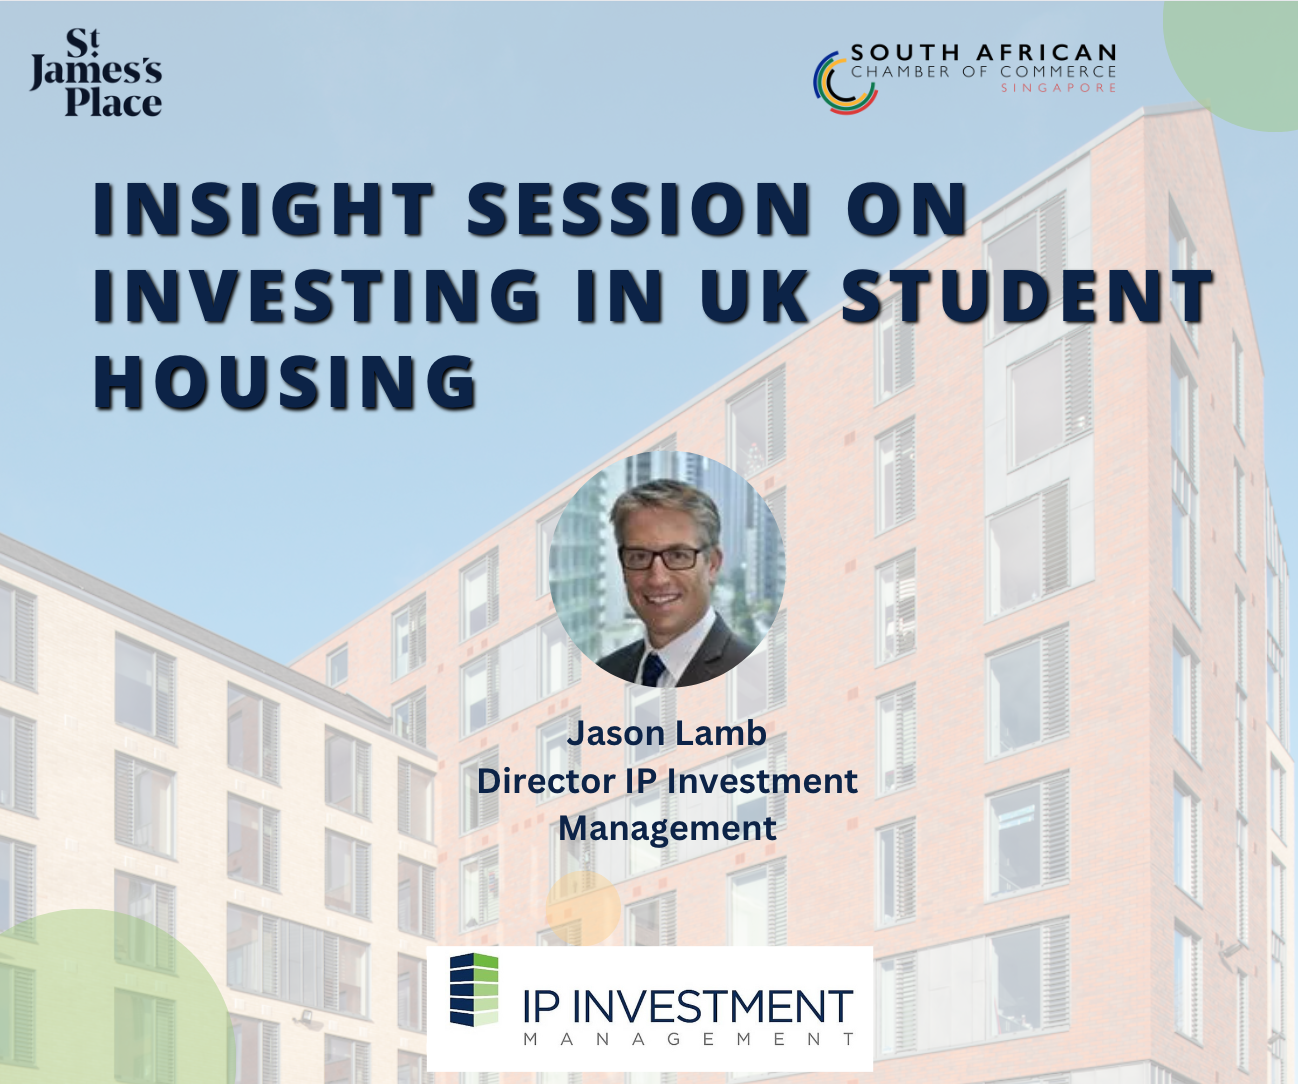 thumbnails Insight Session on Investing in UK Student Housing